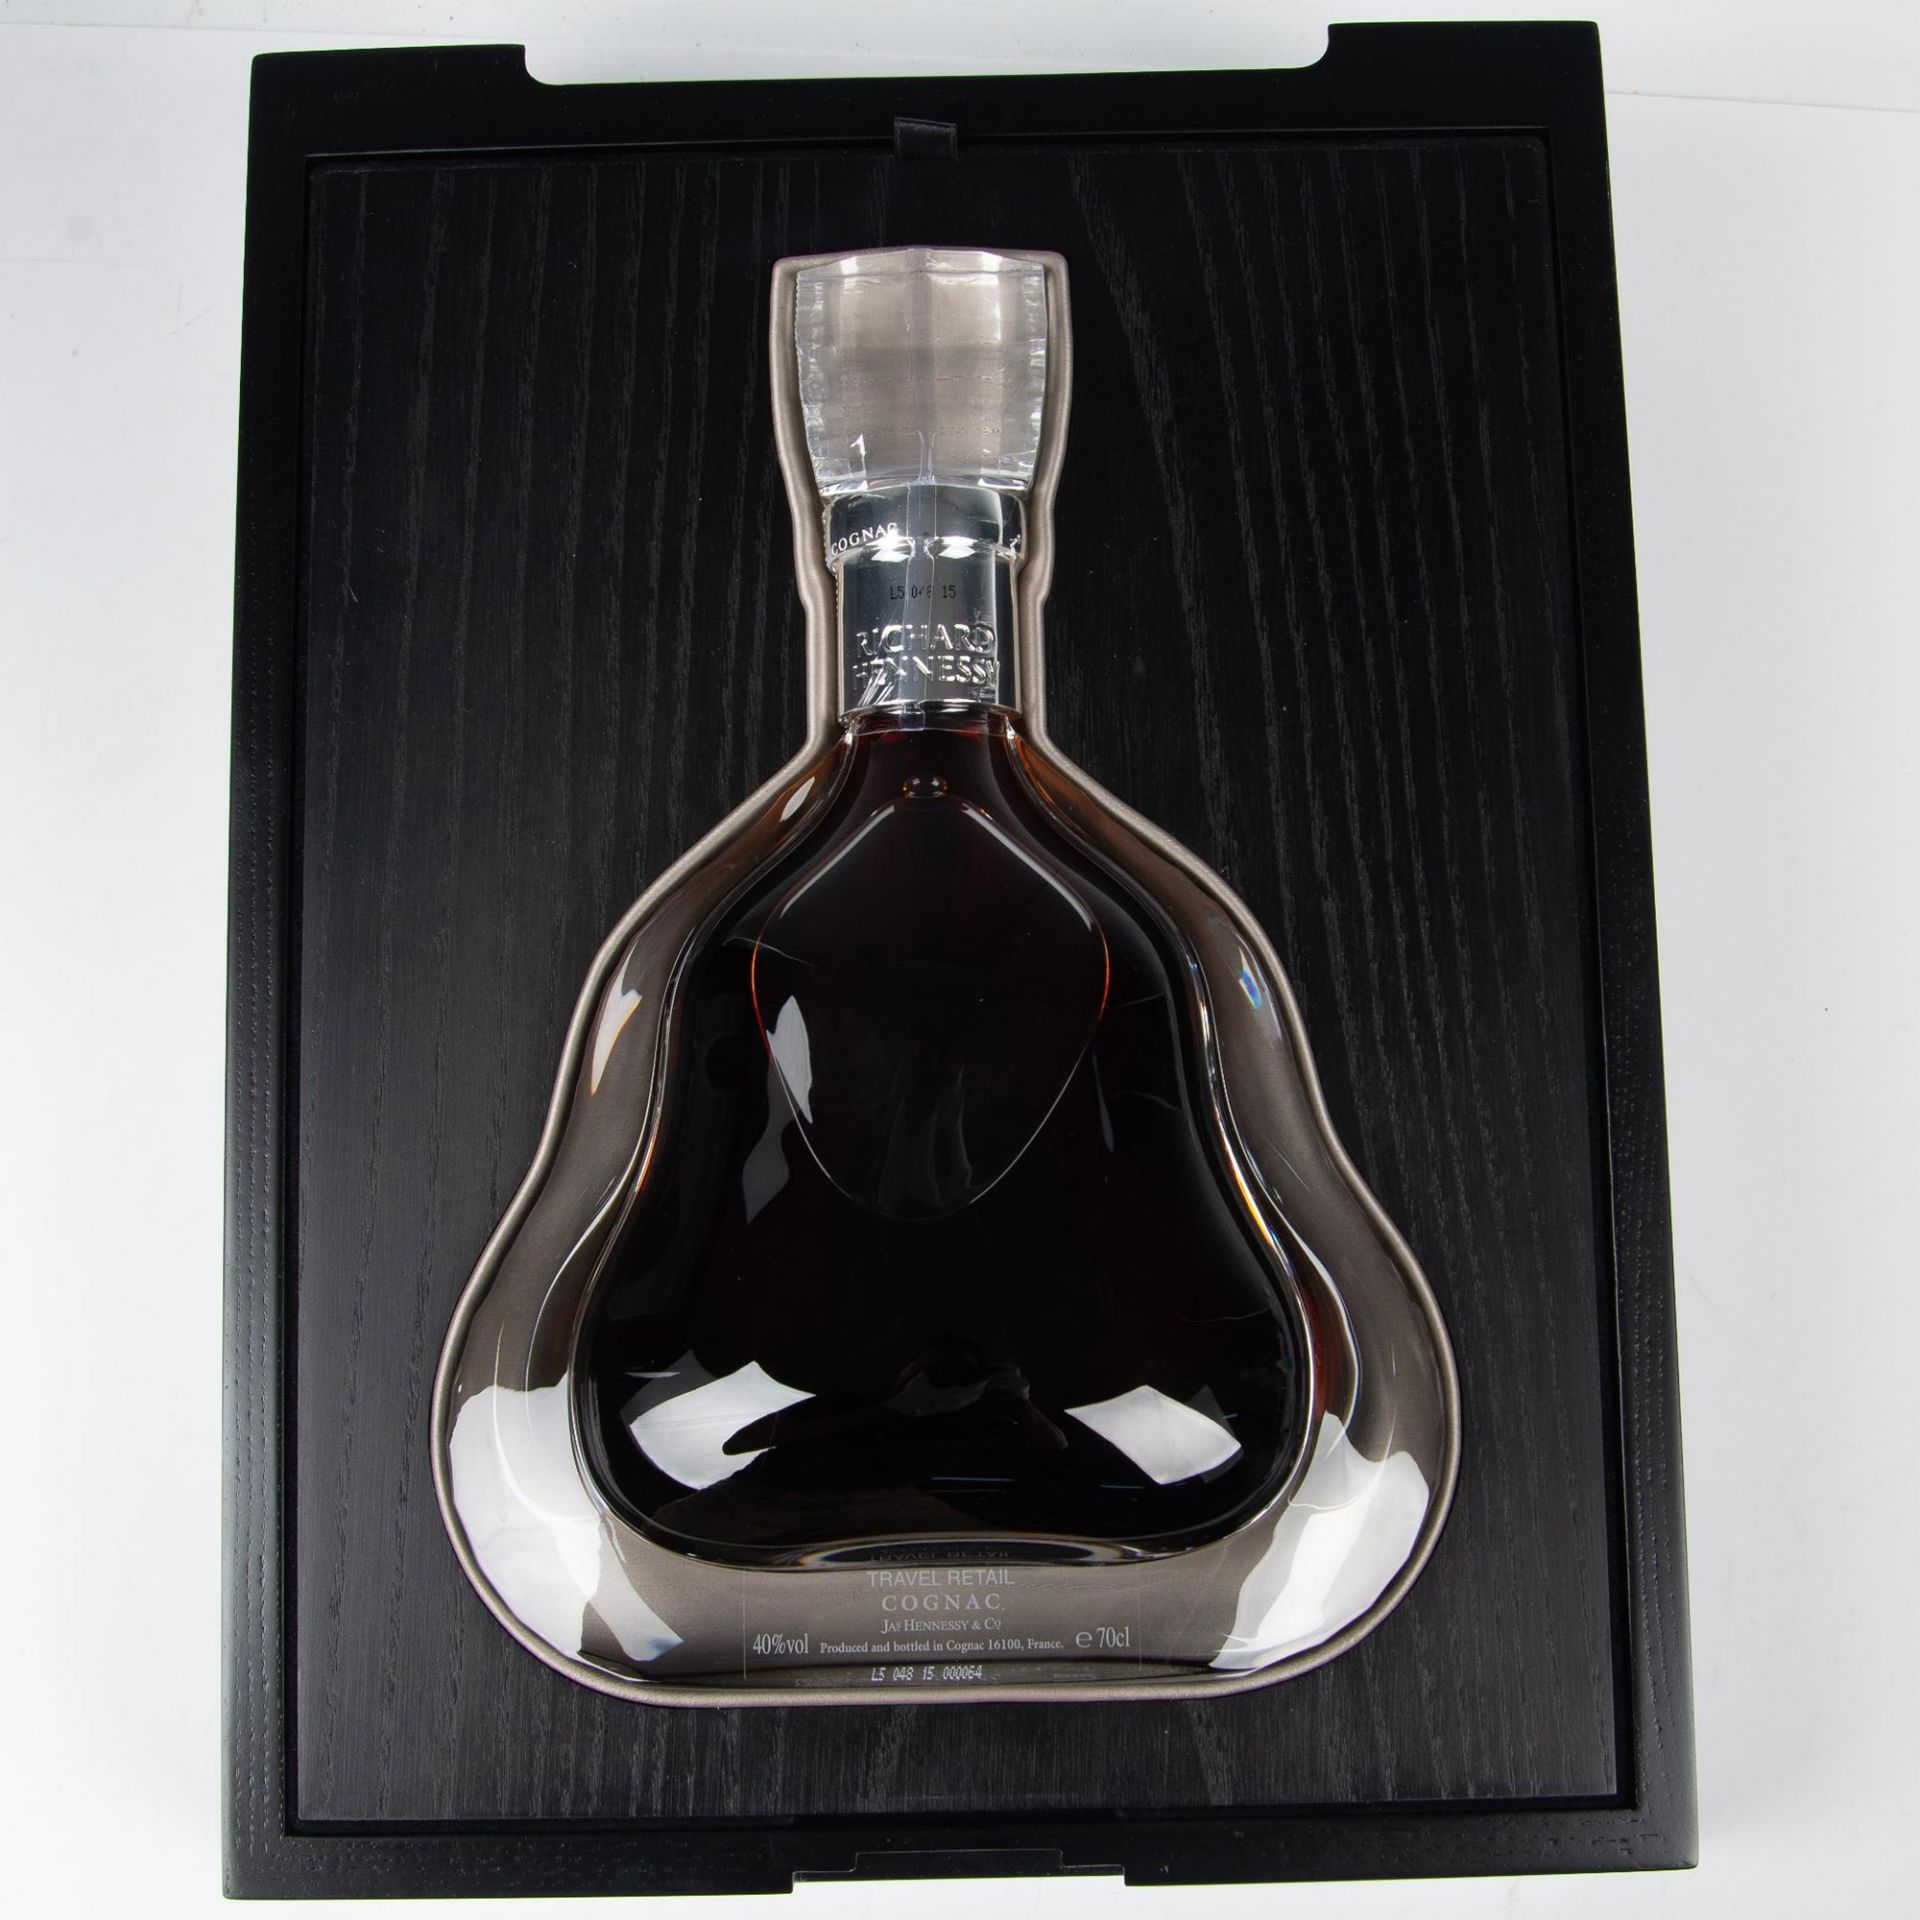 Richard Hennessy & Co. Cognac, Baccarat Crystal - Image 14 of 19